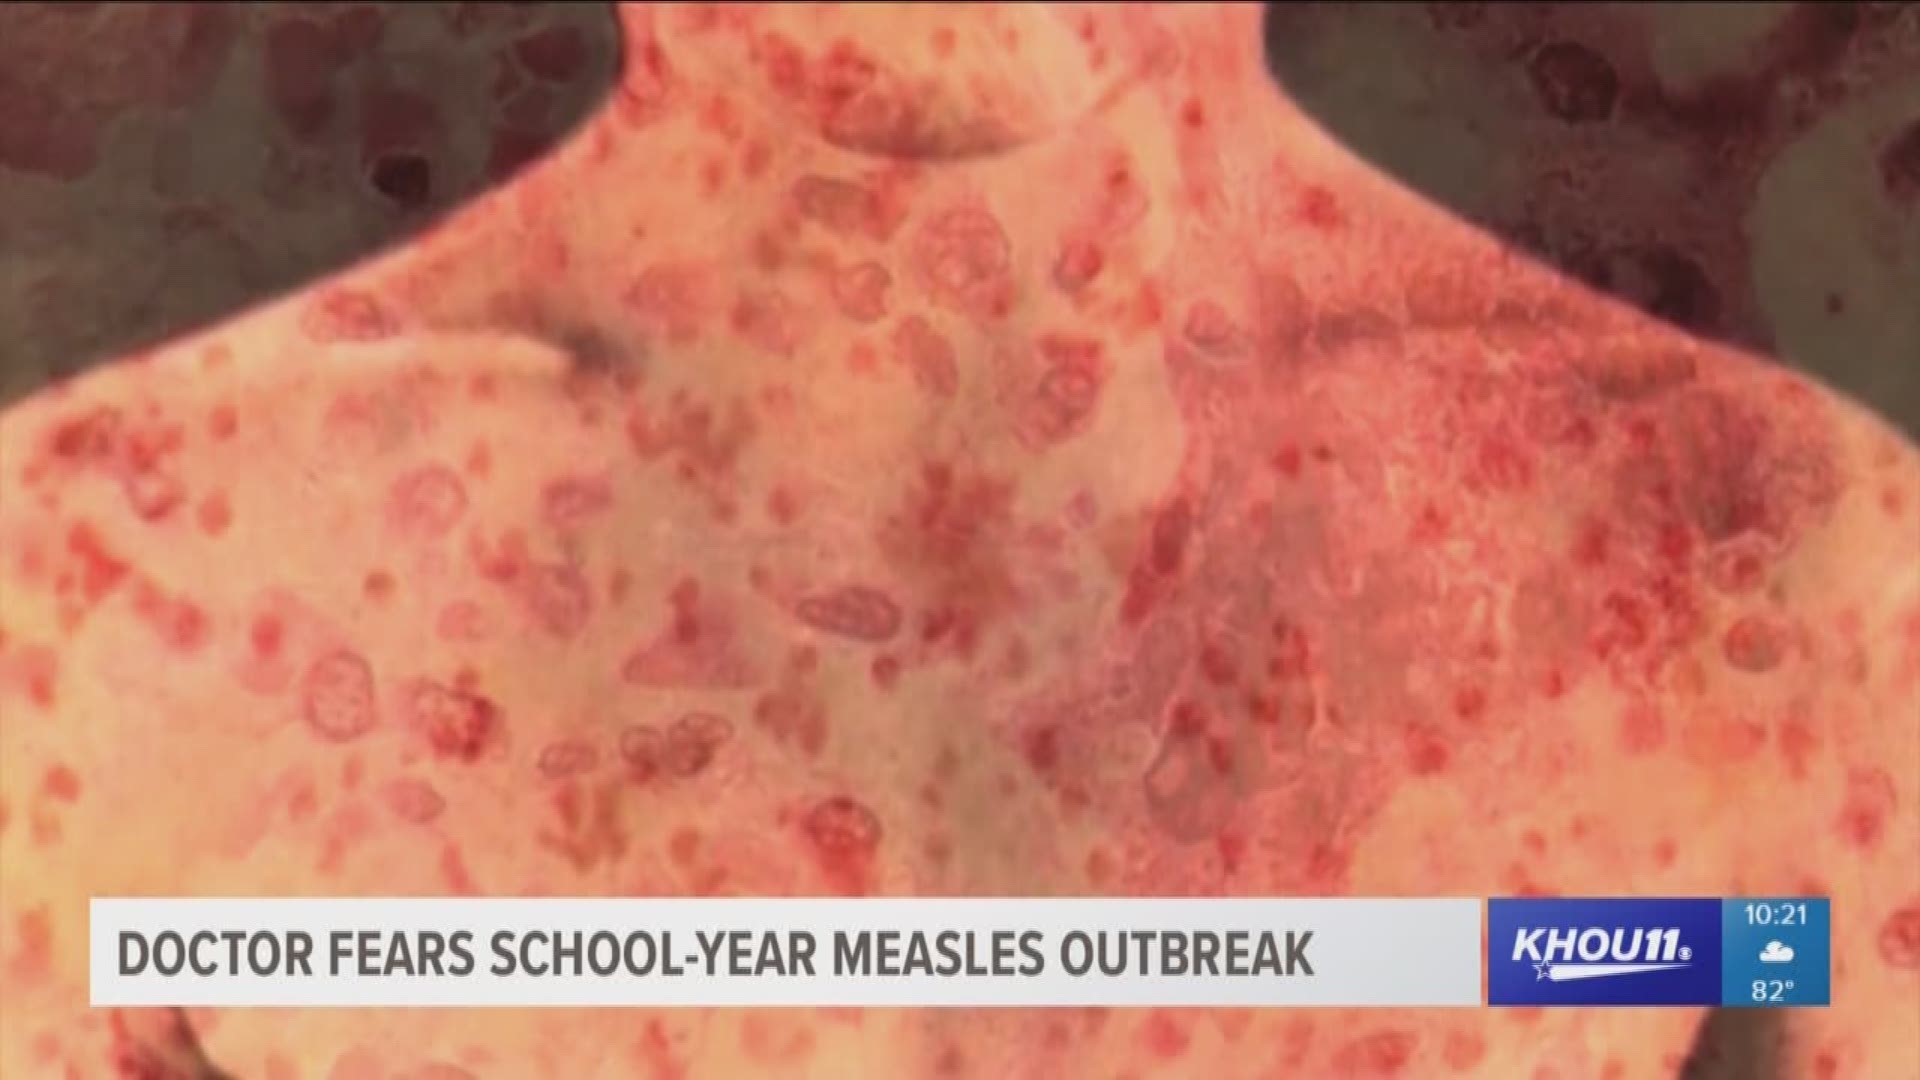 We look at why the number of people infected with measles is on the rise. One well-respected doctor tells why he thinks there could be an outbreak this upcoming school year.